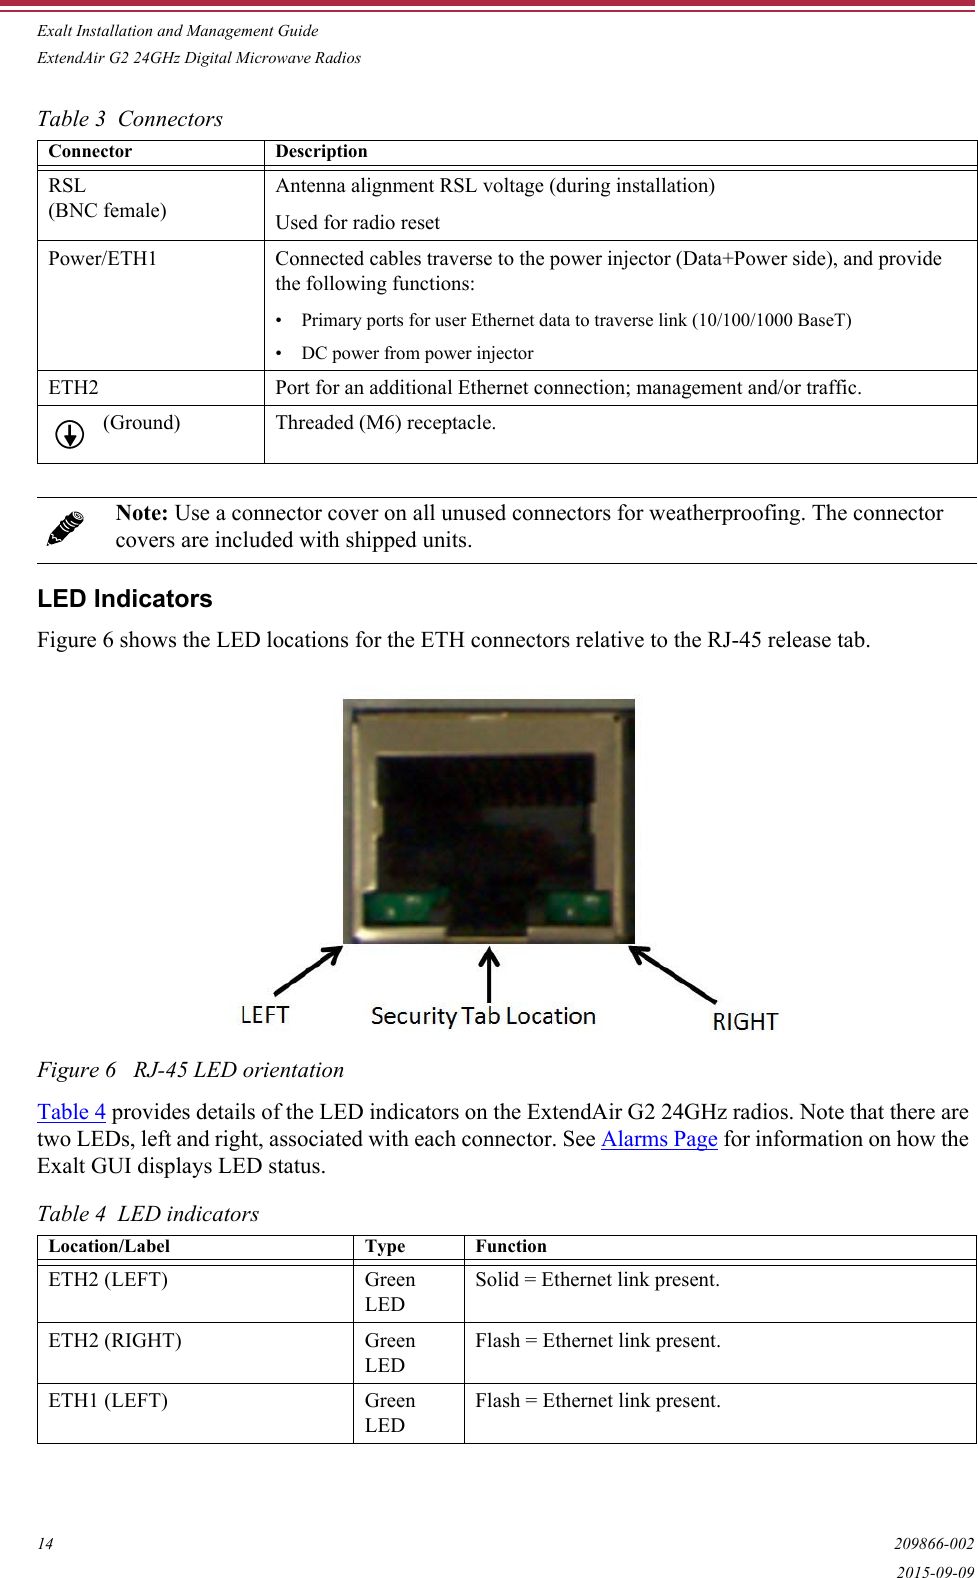 Exalt Installation and Management GuideExtendAir G2 24GHz Digital Microwave Radios14 209866-0022015-09-09LED IndicatorsFigure 6 shows the LED locations for the ETH connectors relative to the RJ-45 release tab.Figure 6   RJ-45 LED orientationTable 4 provides details of the LED indicators on the ExtendAir G2 24GHz radios. Note that there are two LEDs, left and right, associated with each connector. See Alarms Page for information on how the Exalt GUI displays LED status.Table 3  ConnectorsConnector  DescriptionRSL(BNC female)Antenna alignment RSL voltage (during installation)Used for radio resetPower/ETH1 Connected cables traverse to the power injector (Data+Power side), and provide the following functions:• Primary ports for user Ethernet data to traverse link (10/100/1000 BaseT)• DC power from power injectorETH2  Port for an additional Ethernet connection; management and/or traffic.(Ground)  Threaded (M6) receptacle.Note: Use a connector cover on all unused connectors for weatherproofing. The connector covers are included with shipped units.Table 4  LED indicatorsLocation/Label  Type  Function ETH2 (LEFT) Green LED Solid = Ethernet link present. ETH2 (RIGHT) Green LED Flash = Ethernet link present. ETH1 (LEFT) Green LED Flash = Ethernet link present.